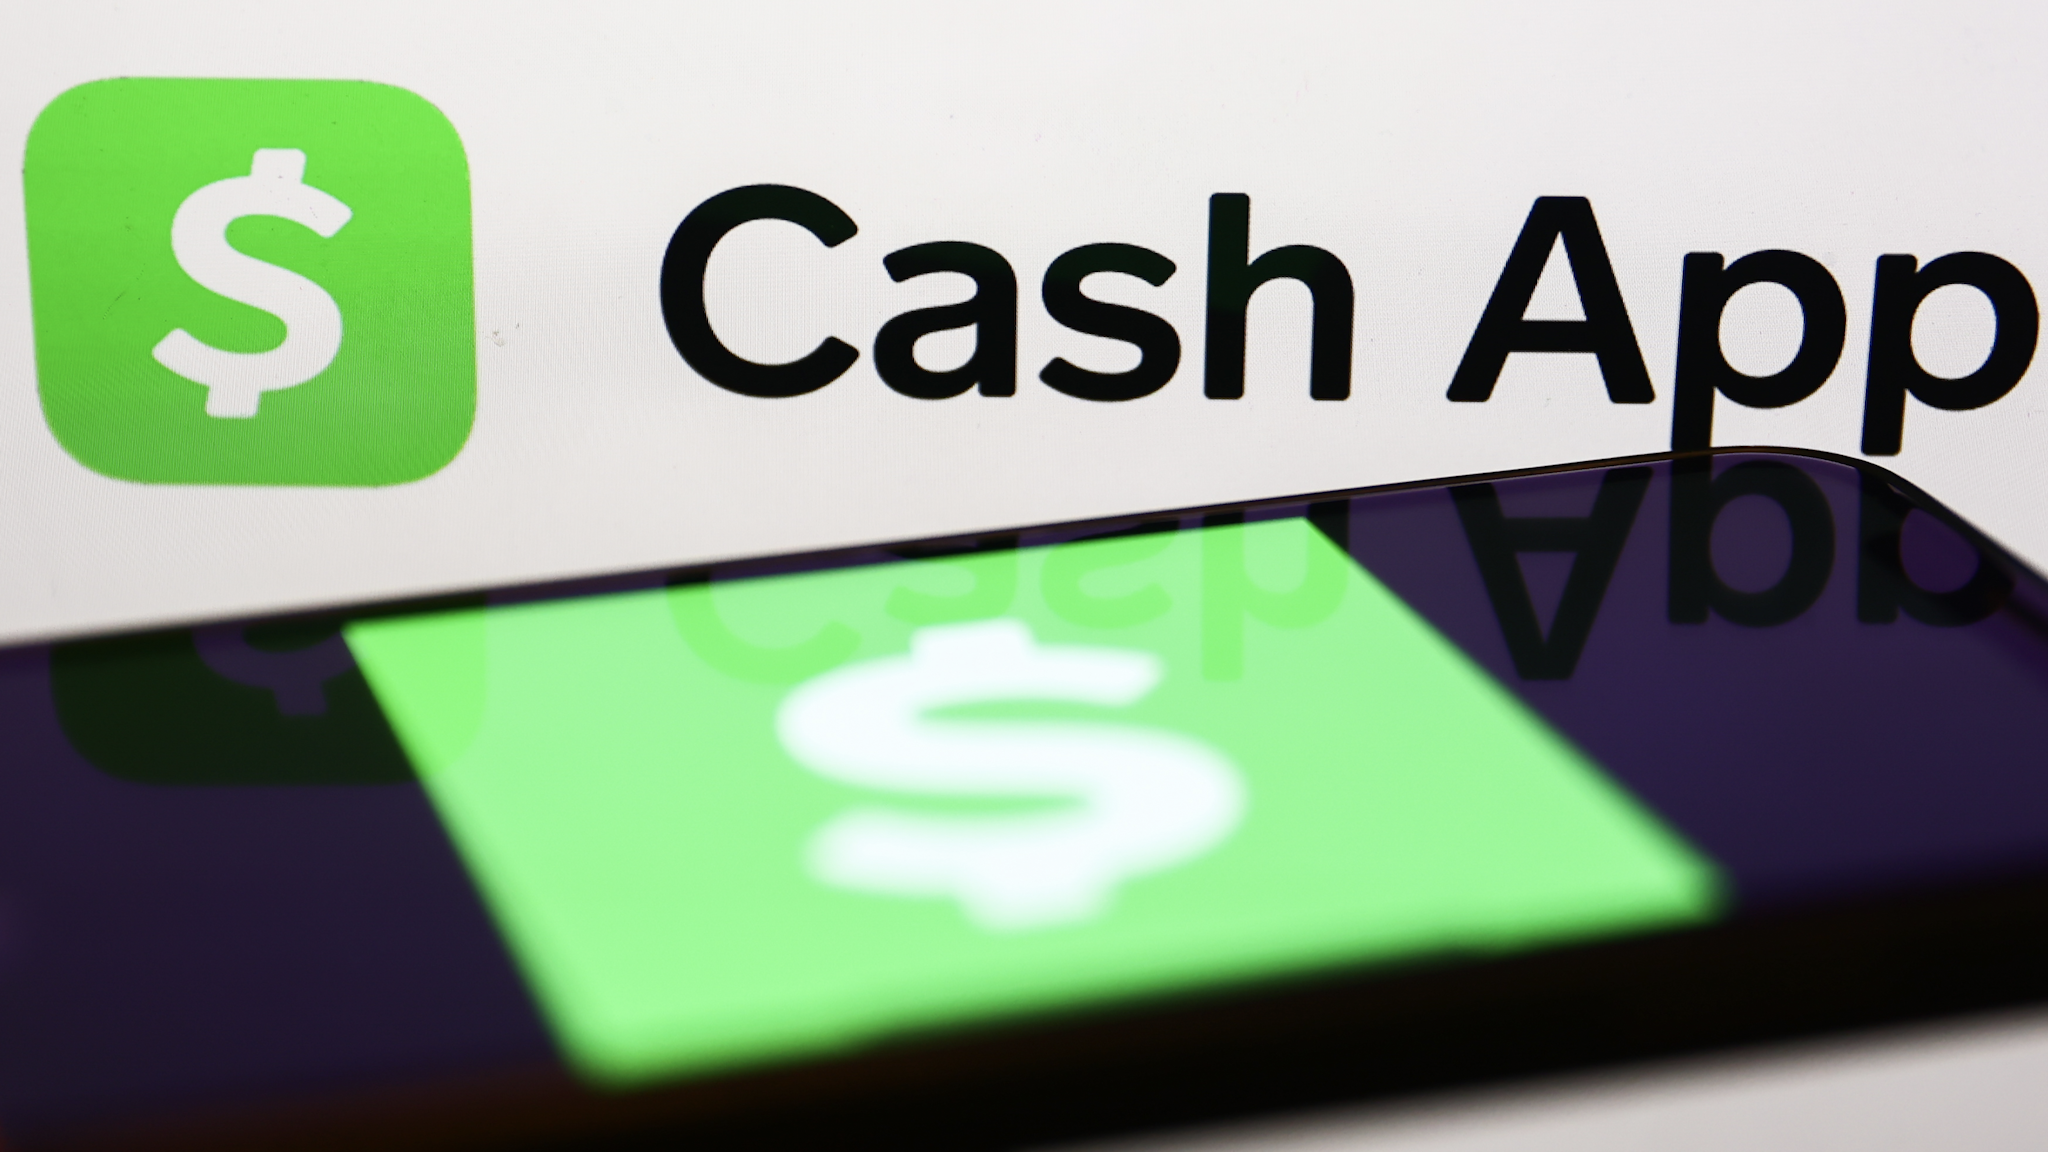 Cash App logo displayed on a laptop screen and Cash App icon displayed on a phone screen are seen in this illustration photo taken in Krakow, Poland on January 2, 2023.